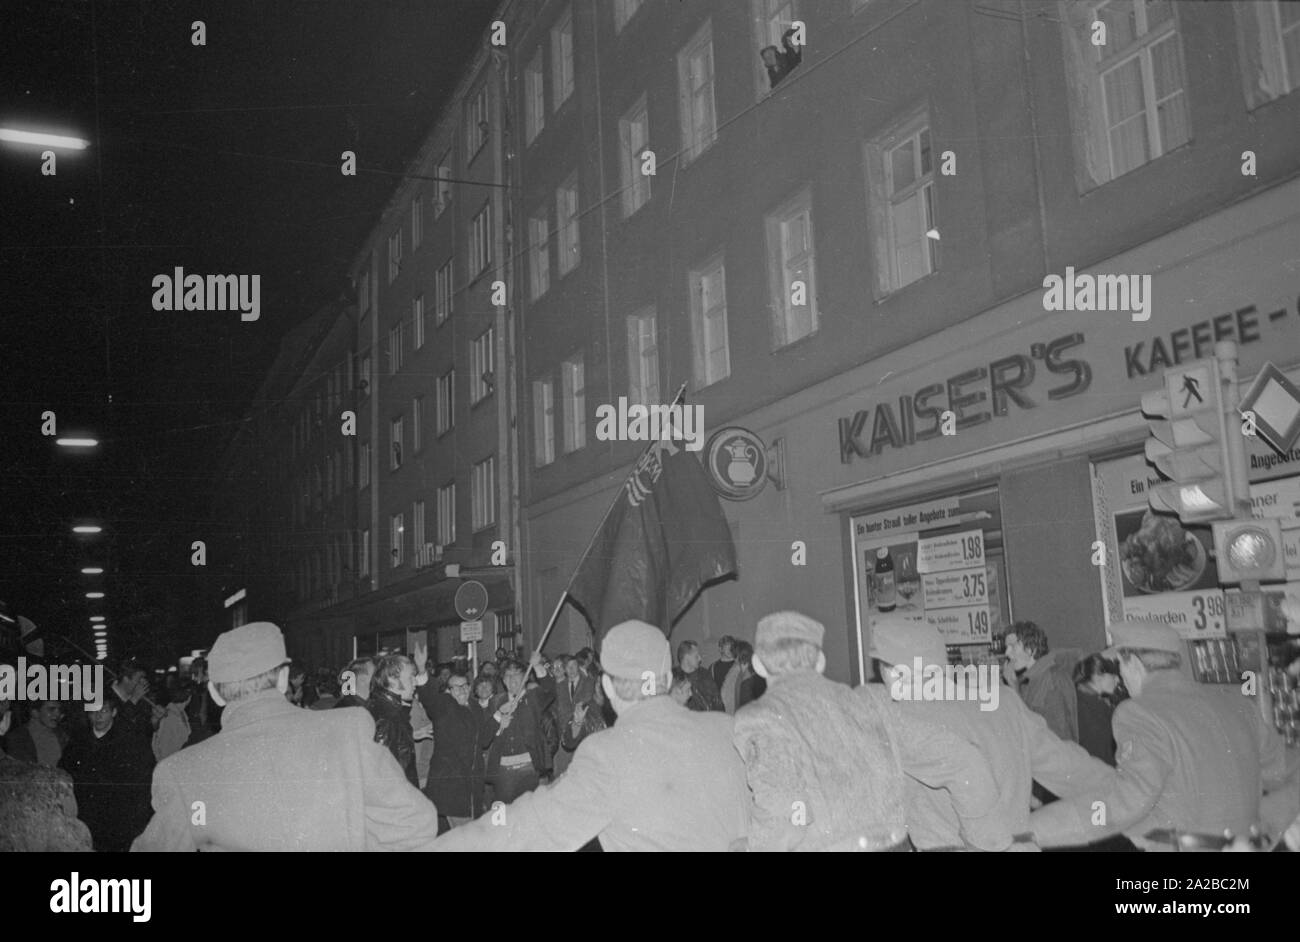 After the assassination attempt on Rudi Dutschke, actions took place against the Springer publishing house throughout Germany on the Easter weekend 1968. In Munich, demonstrators try to stop the delivery of the Bild-Zeitung through the barricade of the Munich bookshop on Schellingstrasse (either 12.04 or 15.04.). Pictured: The police form a chain against the demonstrators. Stock Photo